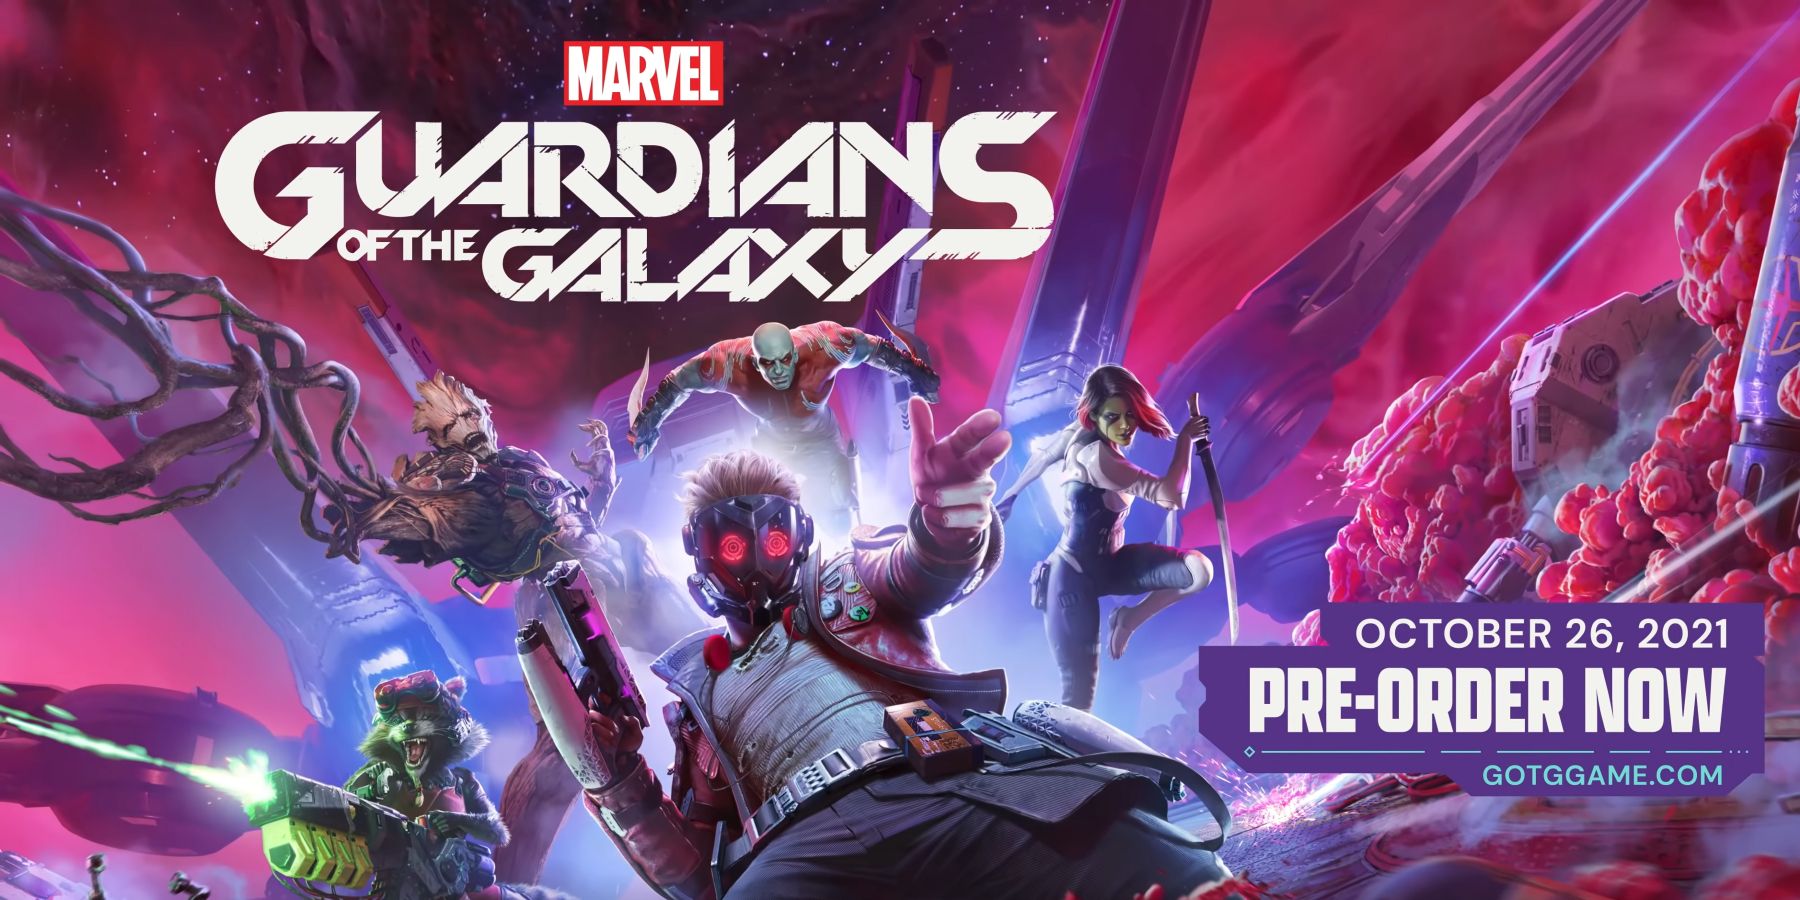 Official artwork banner for Marvel’s Guardians of the Galaxy